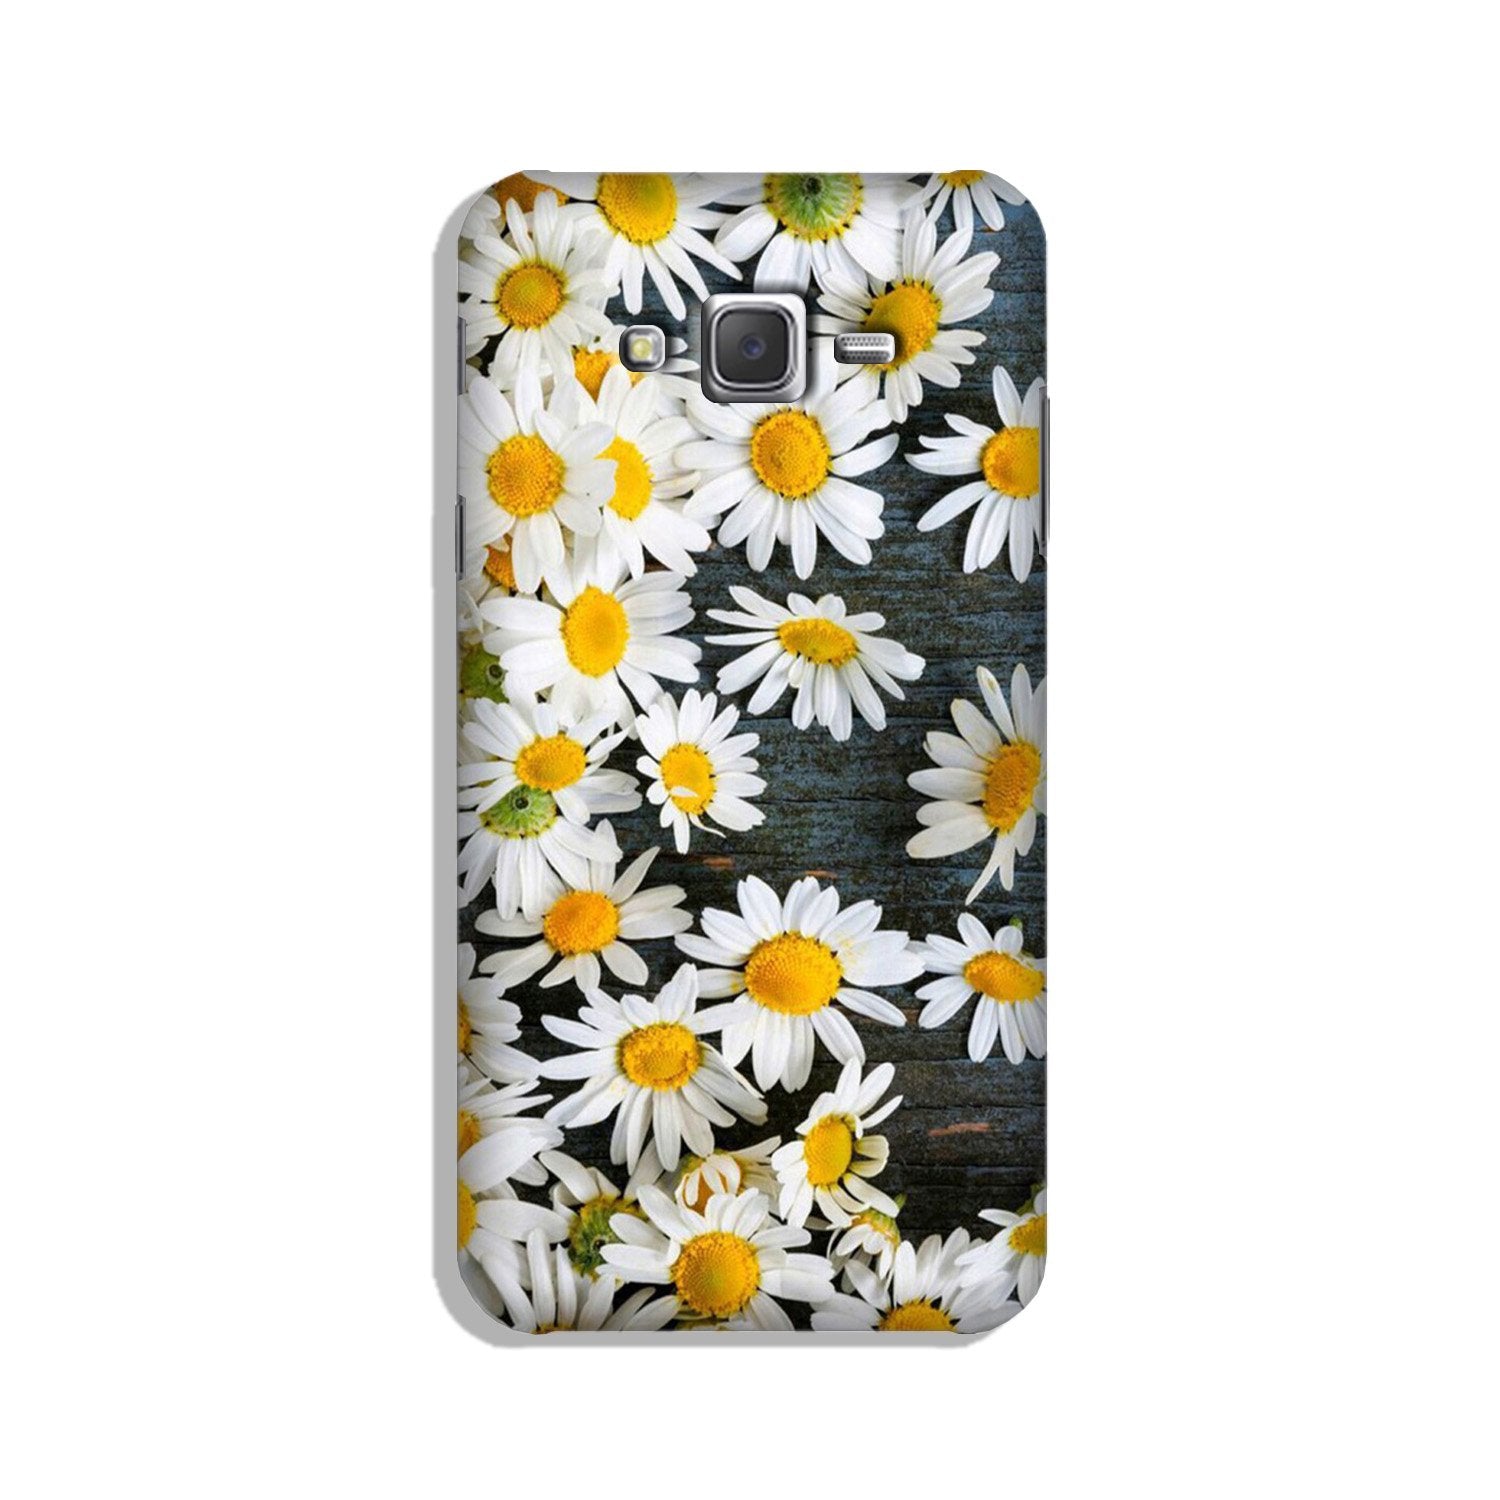 White flowers2 Case for Galaxy J7 (2015)